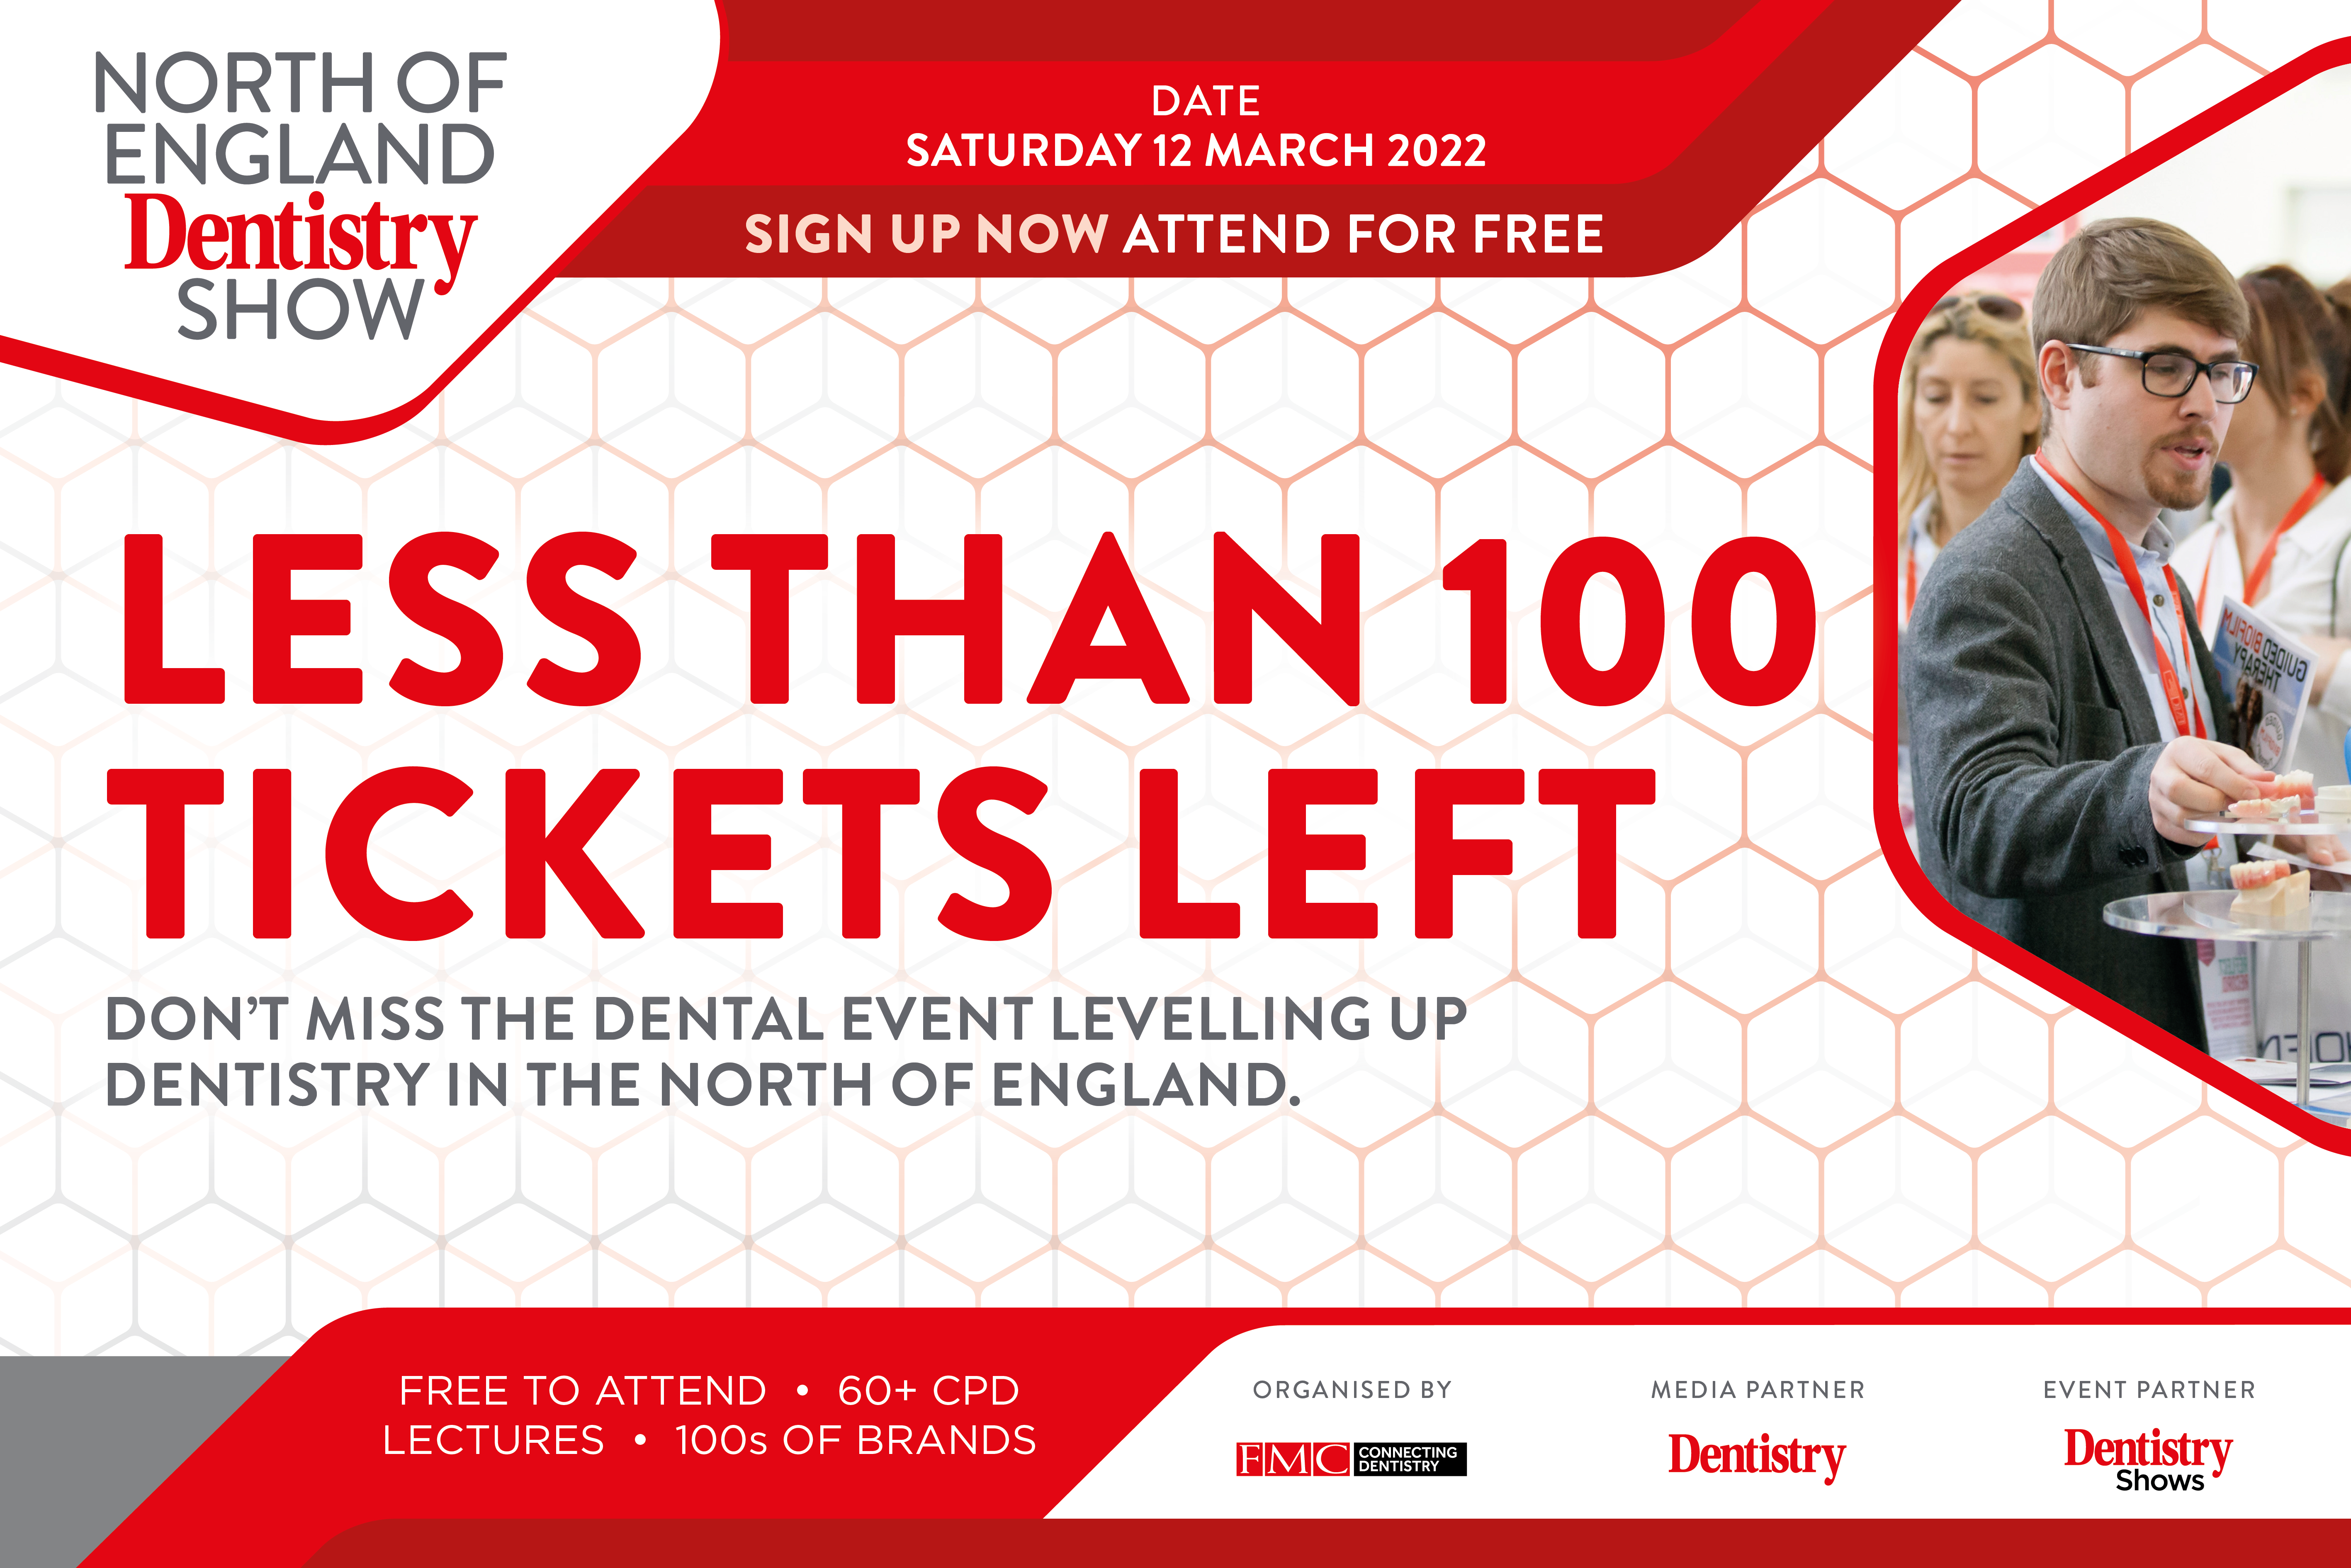 North of England Dentistry Show – just one day to go!